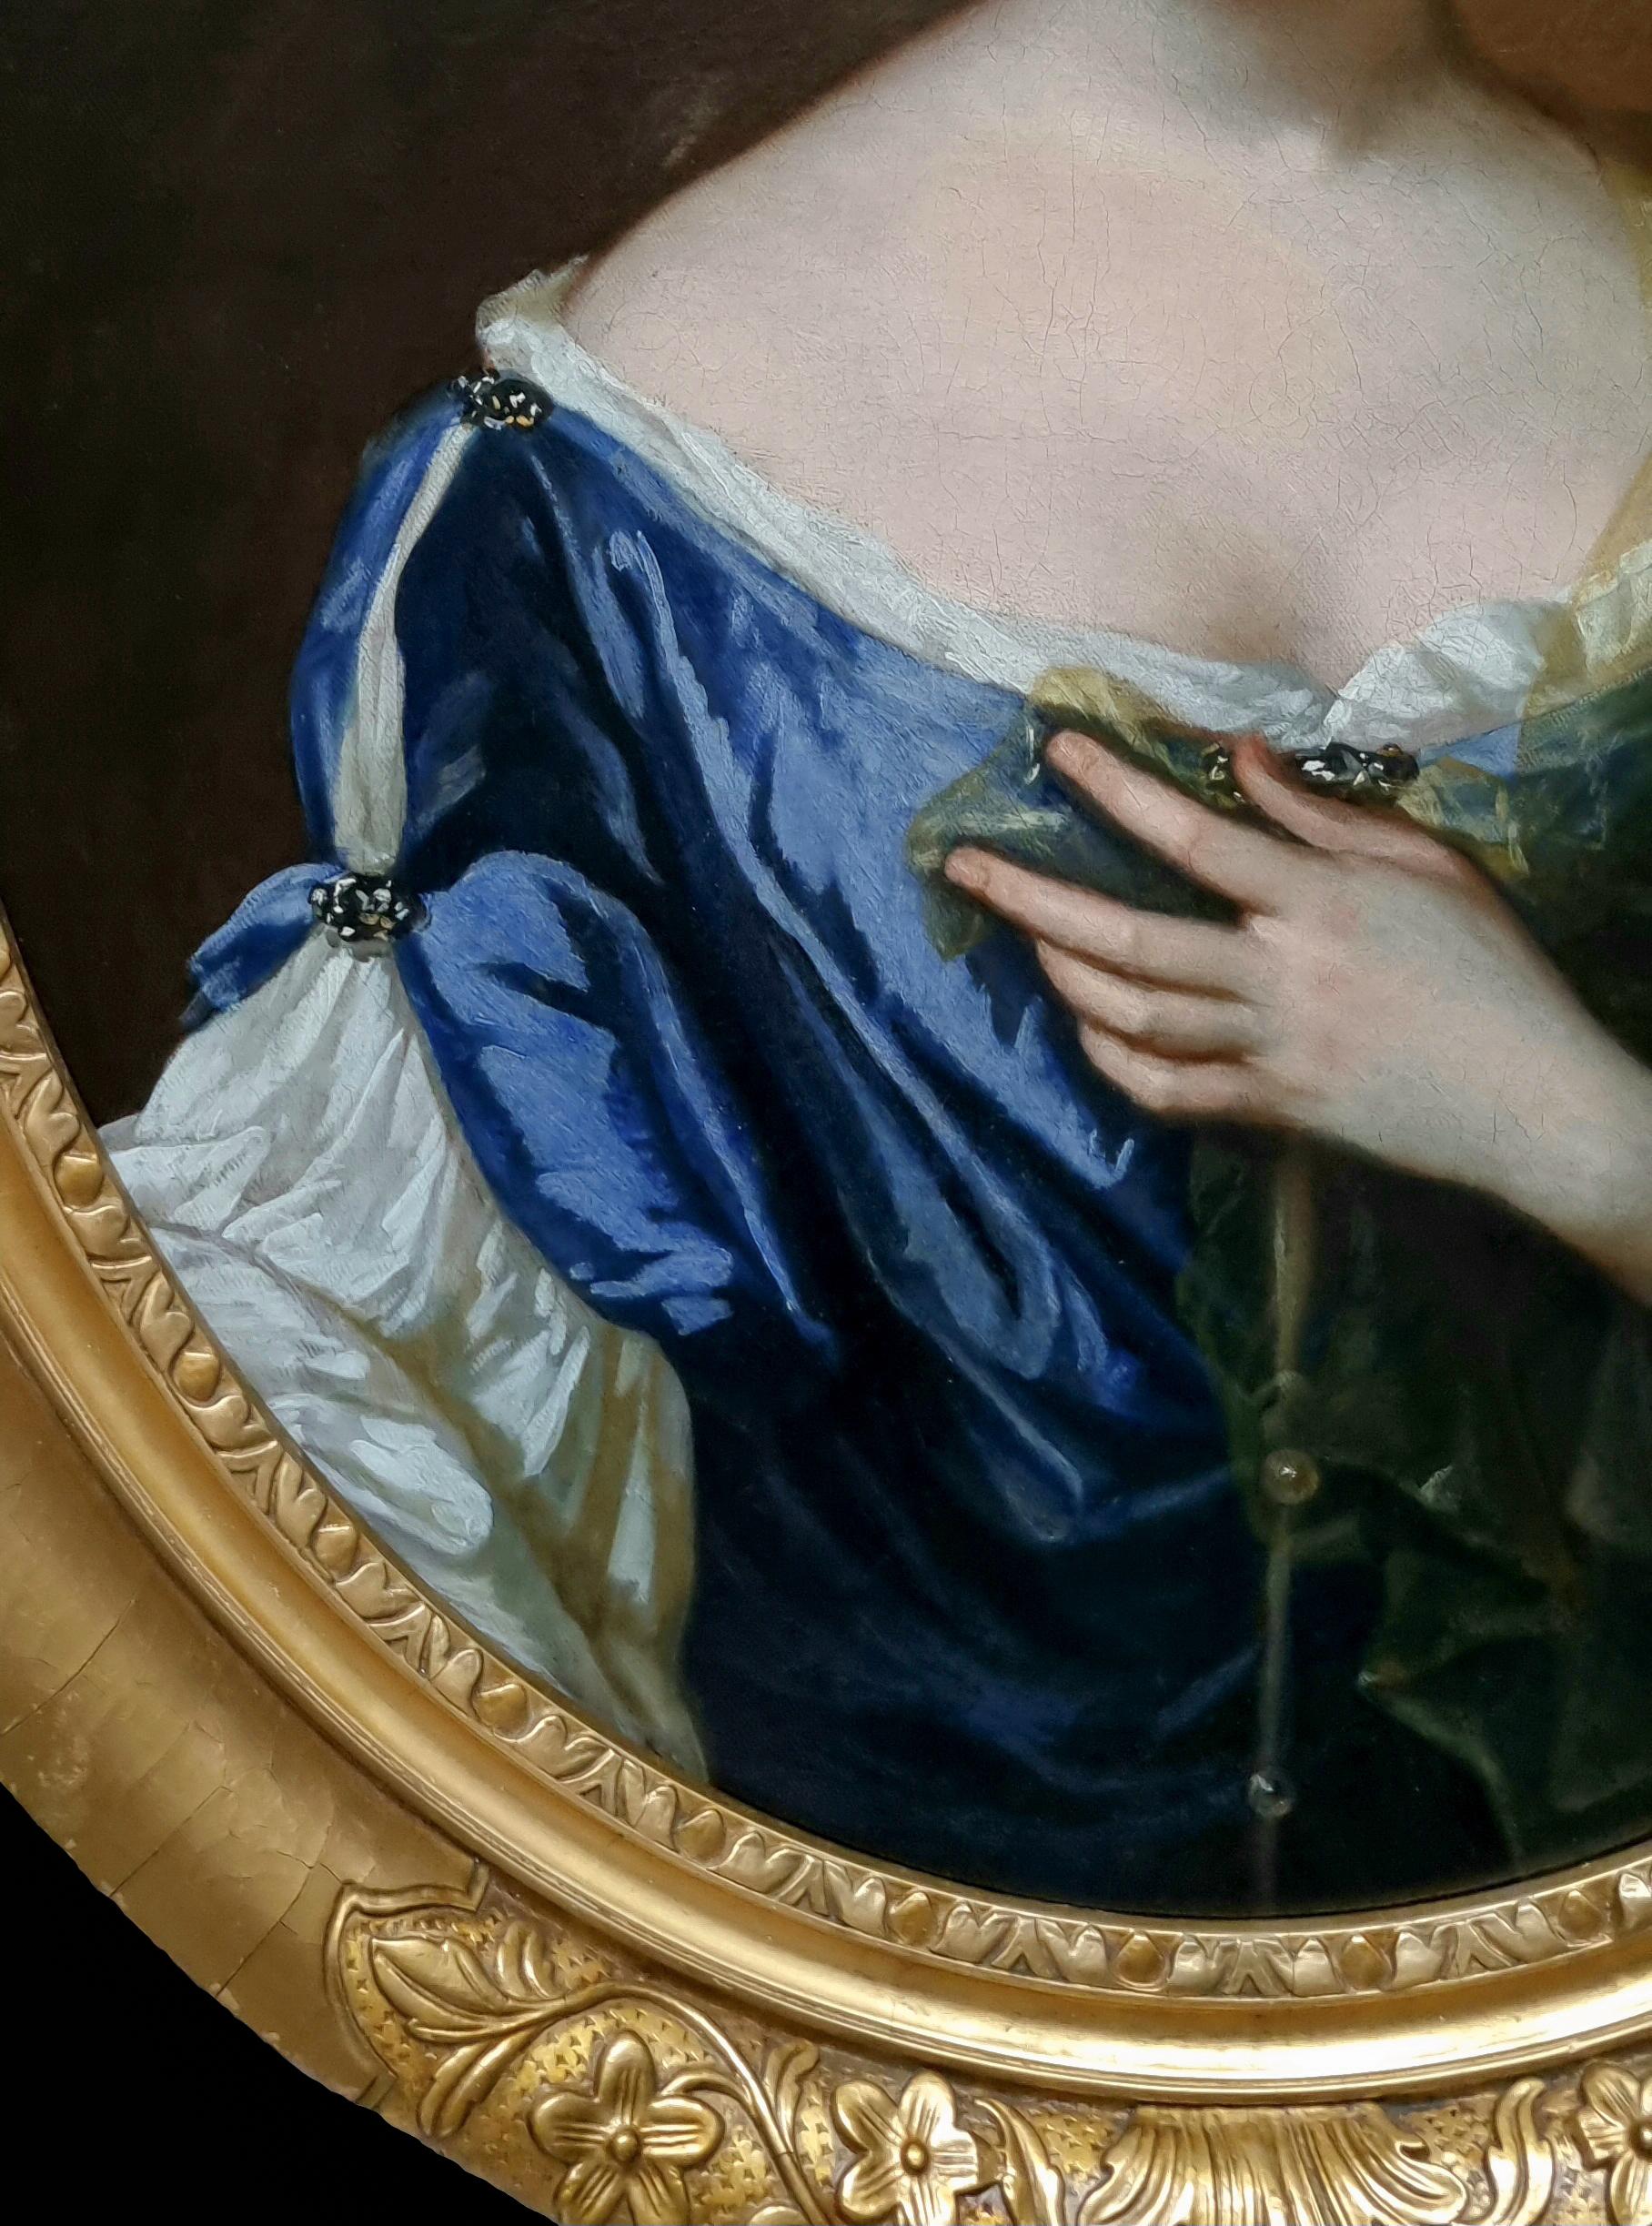 Portrait of a Lady in a Blue Gown Holding a Sheer Scarf c.1675-85, Oil on canvas For Sale 1